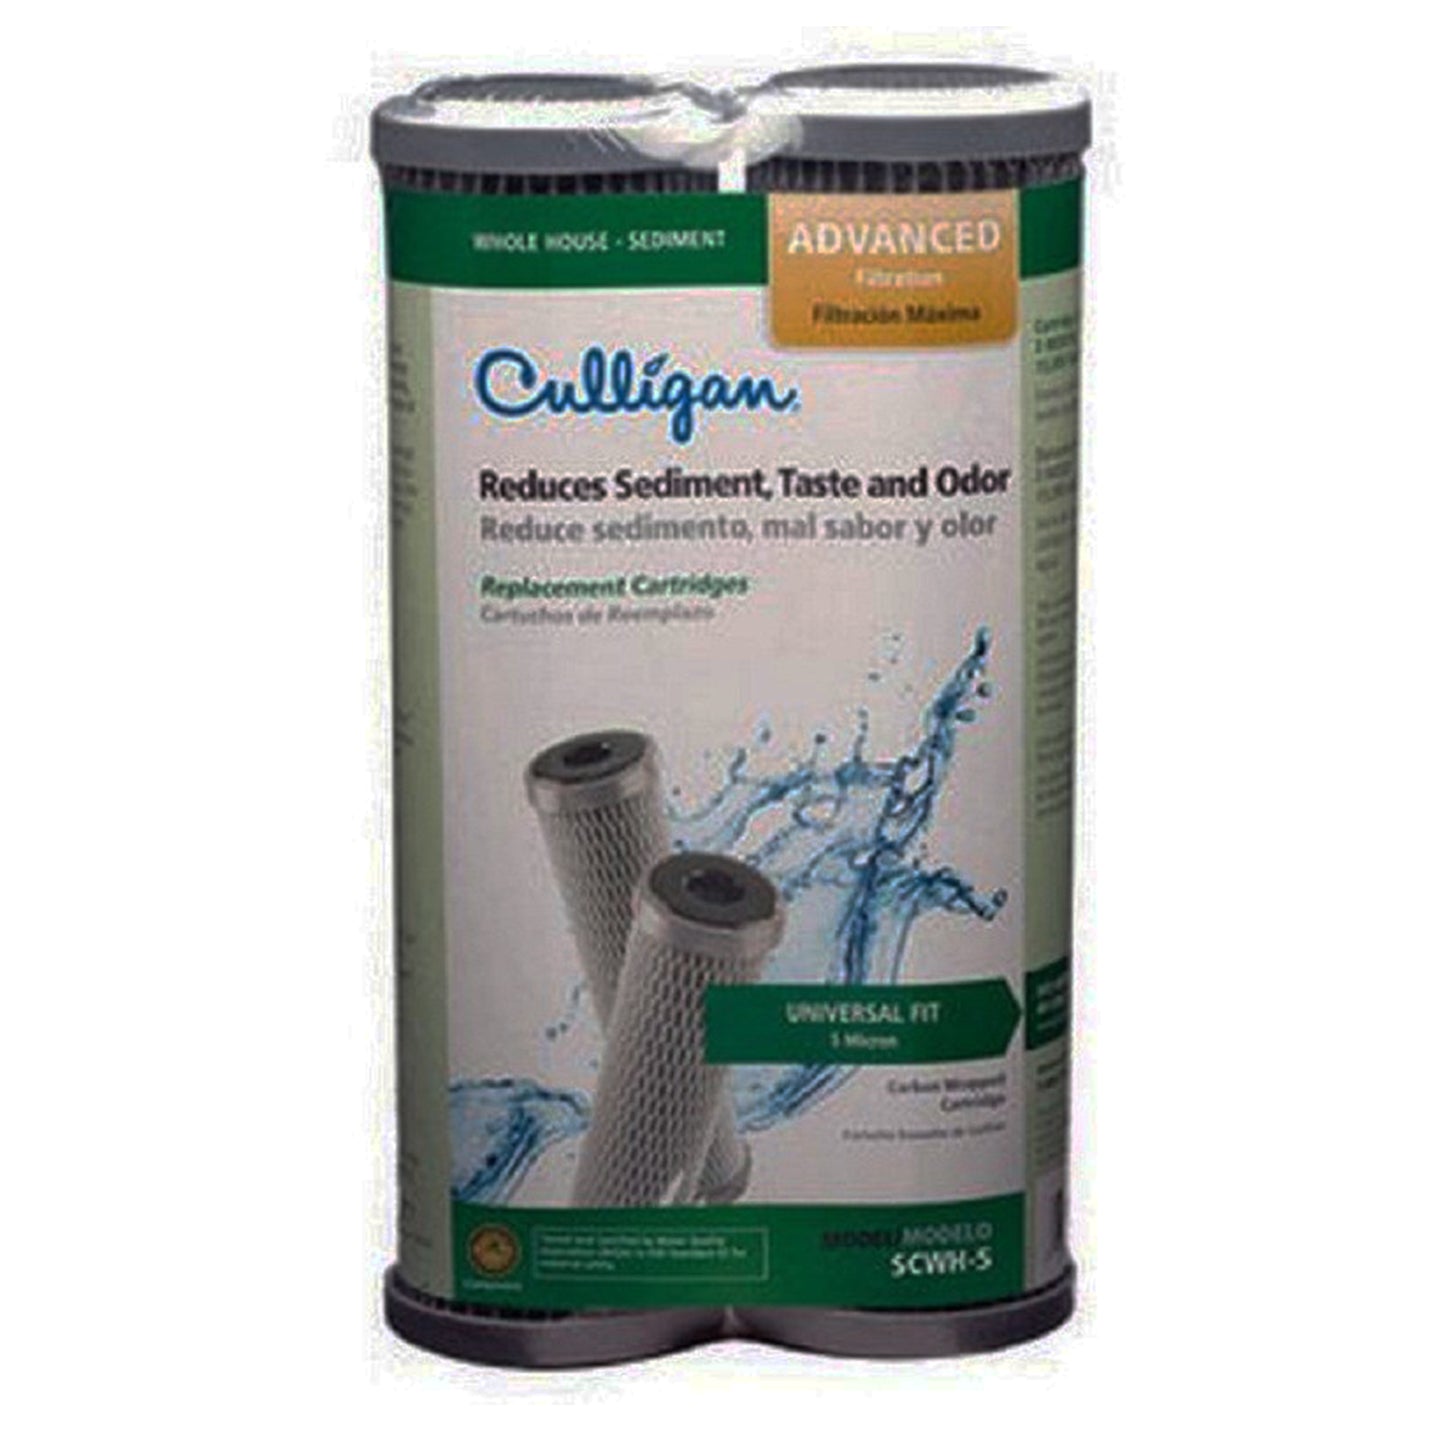 SCWH-5 WTR Water Filter Cartridge by Culligan